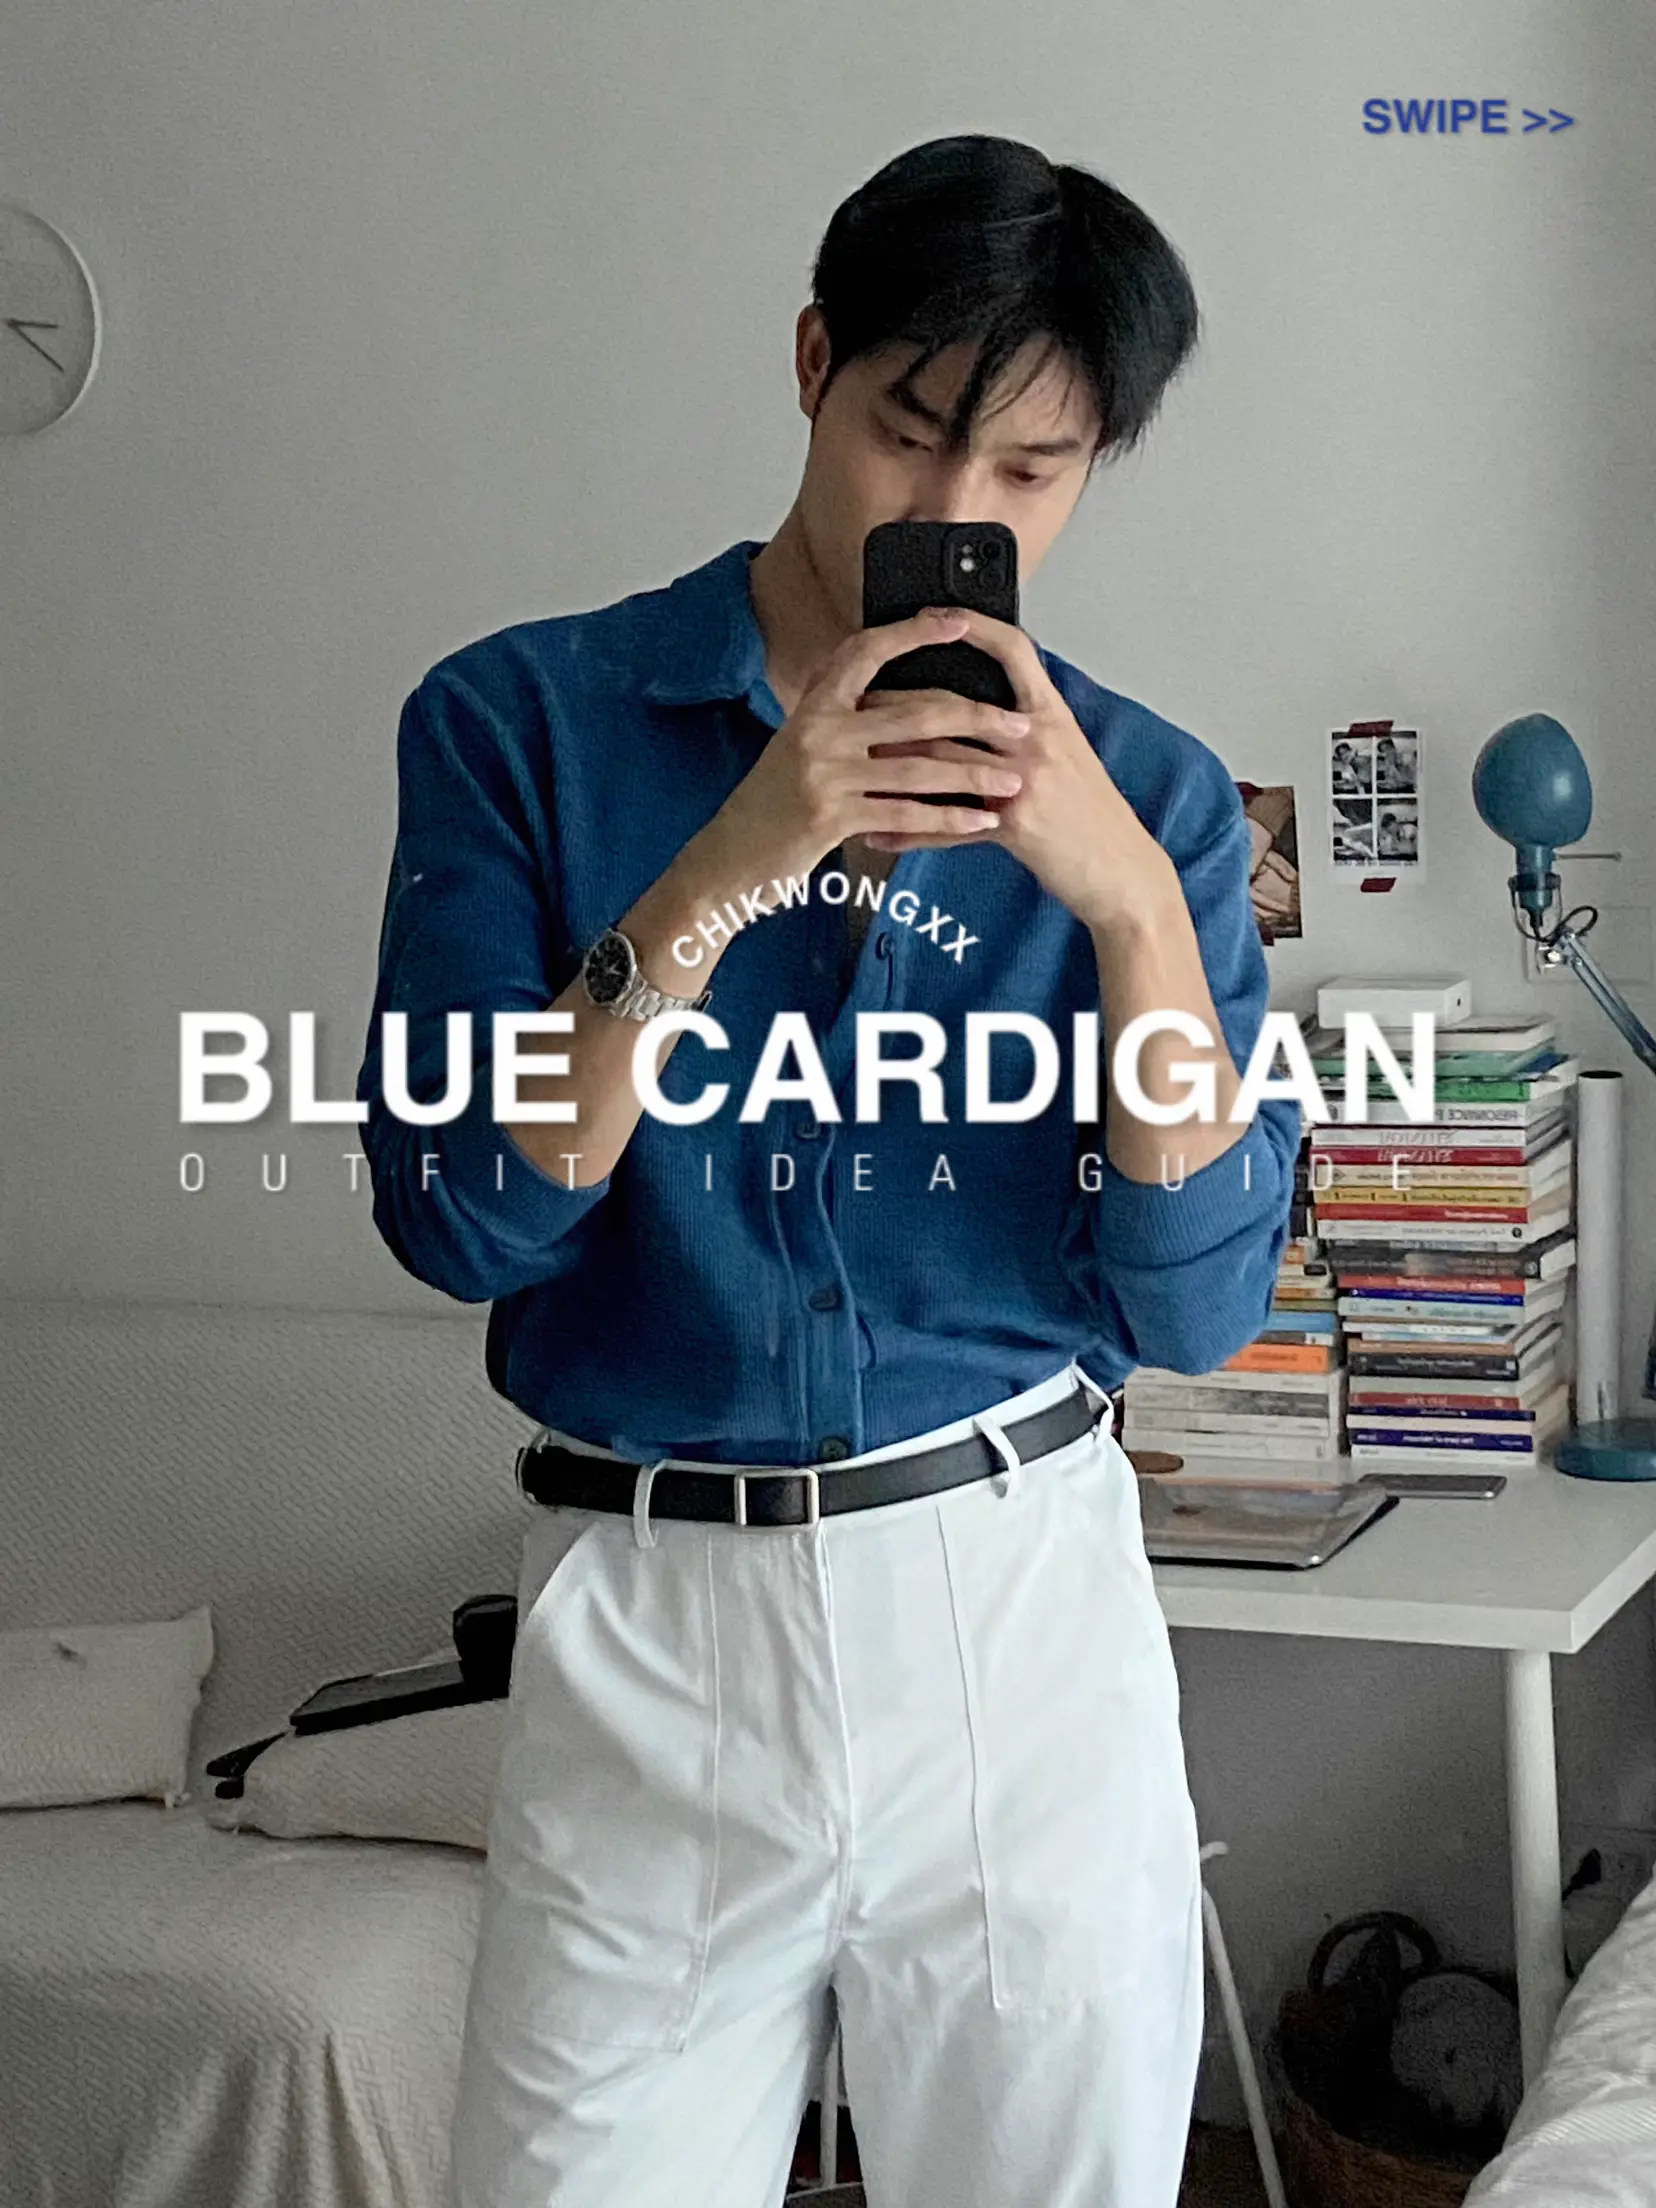 OOTD : BLUE CARDIGAN 💙✨ 's images